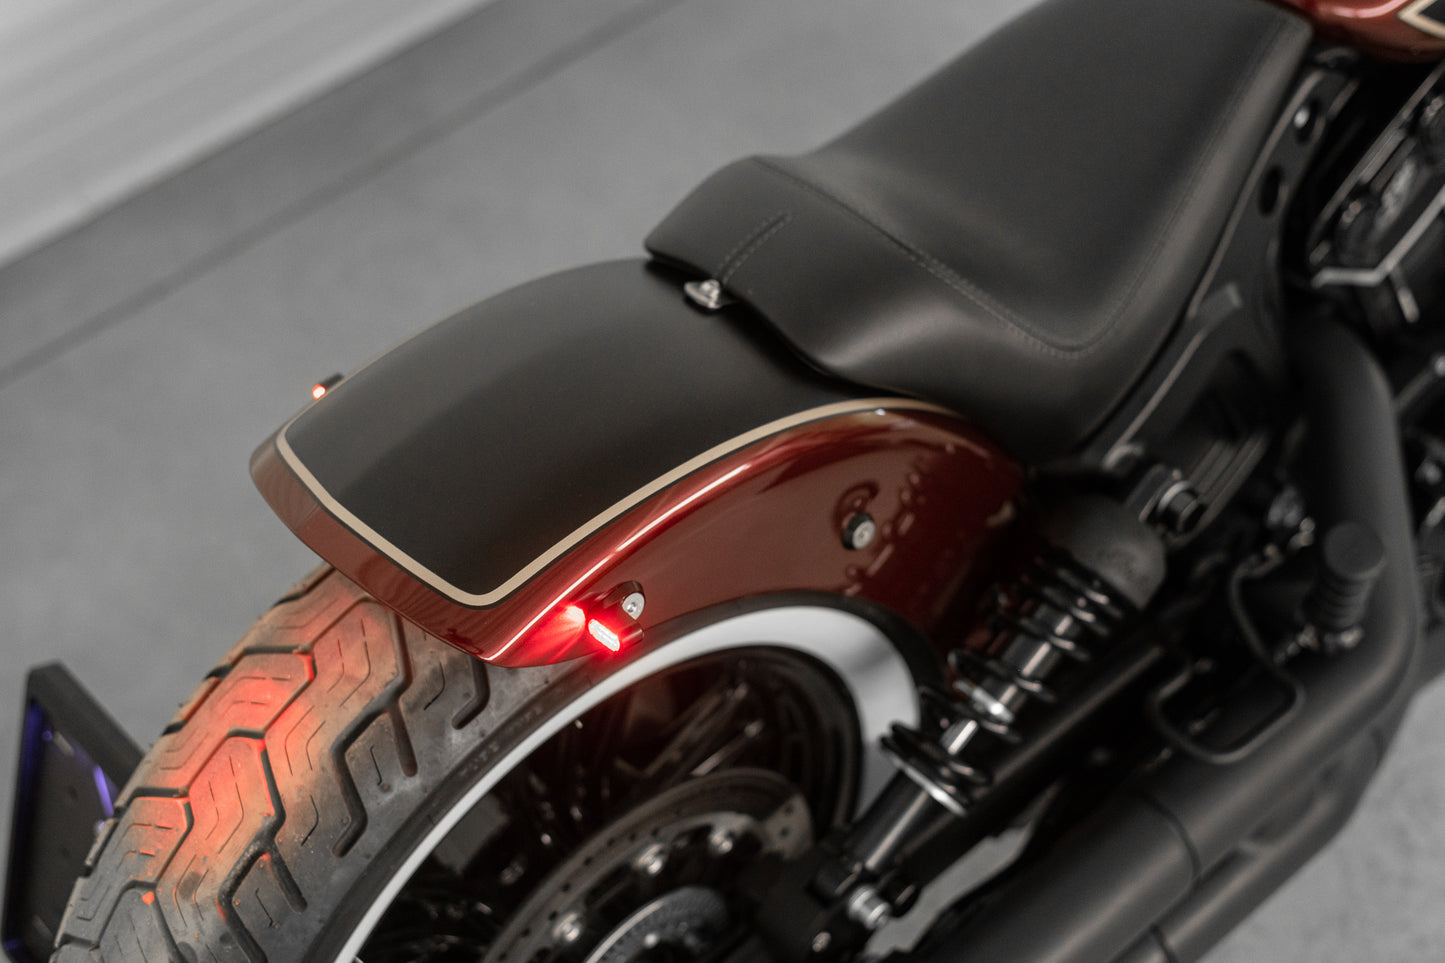 Harley Davidson motorcycle with Killer Custom  "Mohawk" led rear taillight/turn signal combo from above grey background